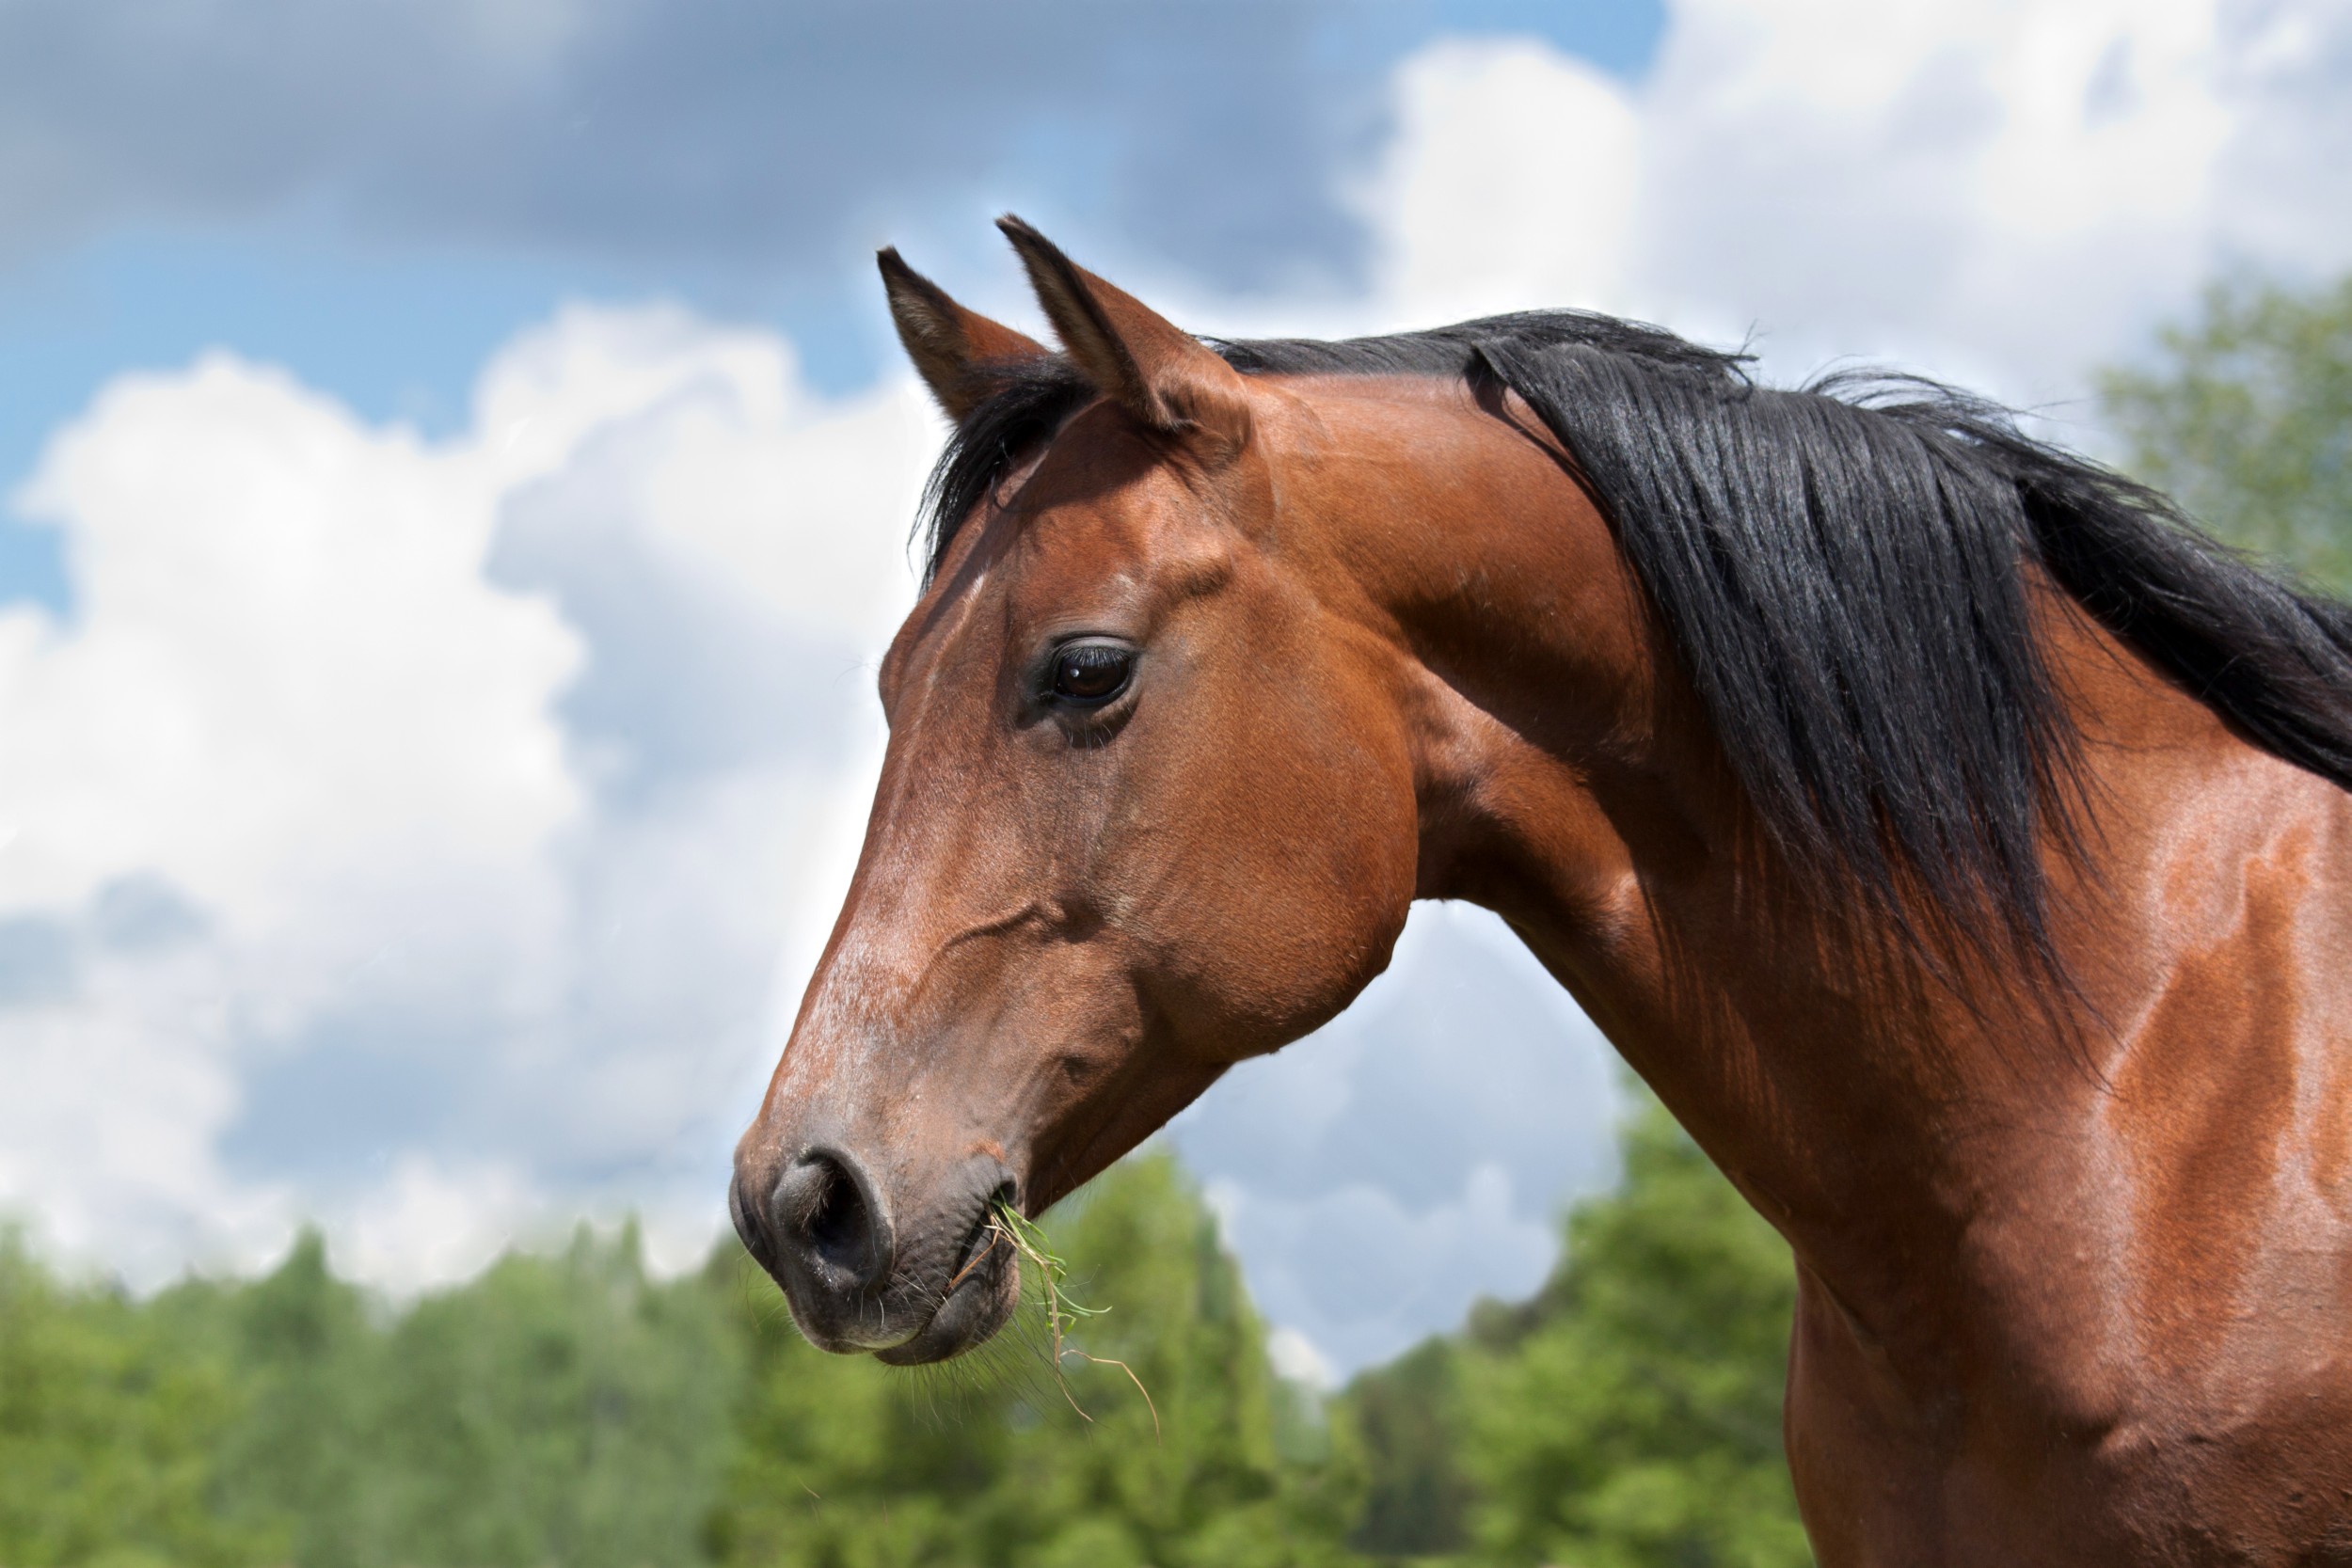 The serum is an immunotherapy based on equine polyclonal antibodies. They are obtained after injecting a Sars-CoV-2 coronavirus protein into horses, it does not develop in these animals, but causes the production of large amounts of neutralizing antibodies.